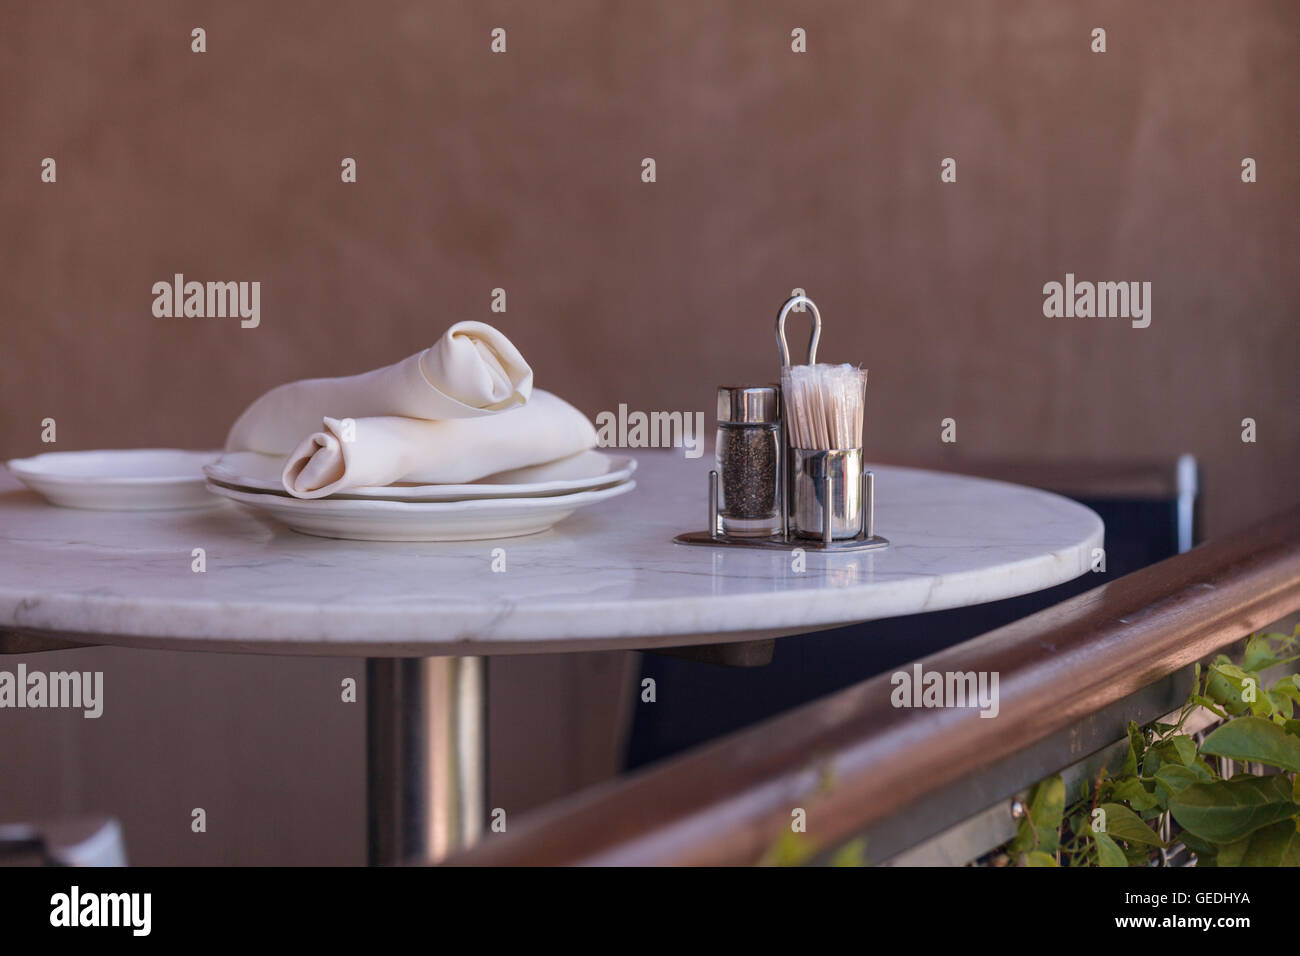 A place setting at an outdoor cafe restaurant in Southern California, United States. Stock Photo